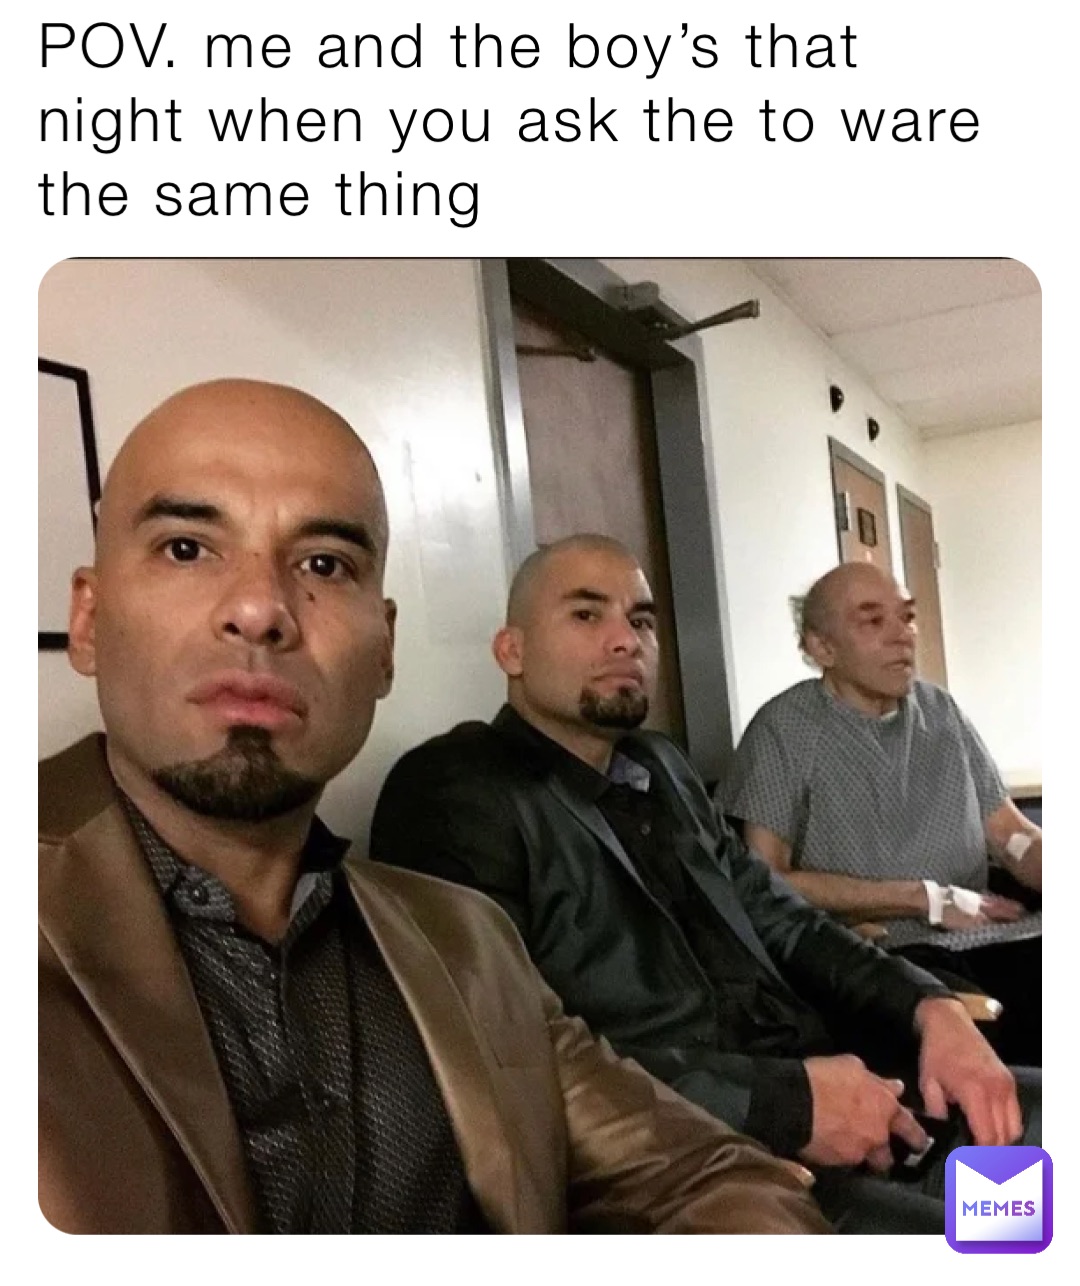 POV. me and the boy's that night when you ask the to ware the same thing |  @cfkj8225w7 | Memes